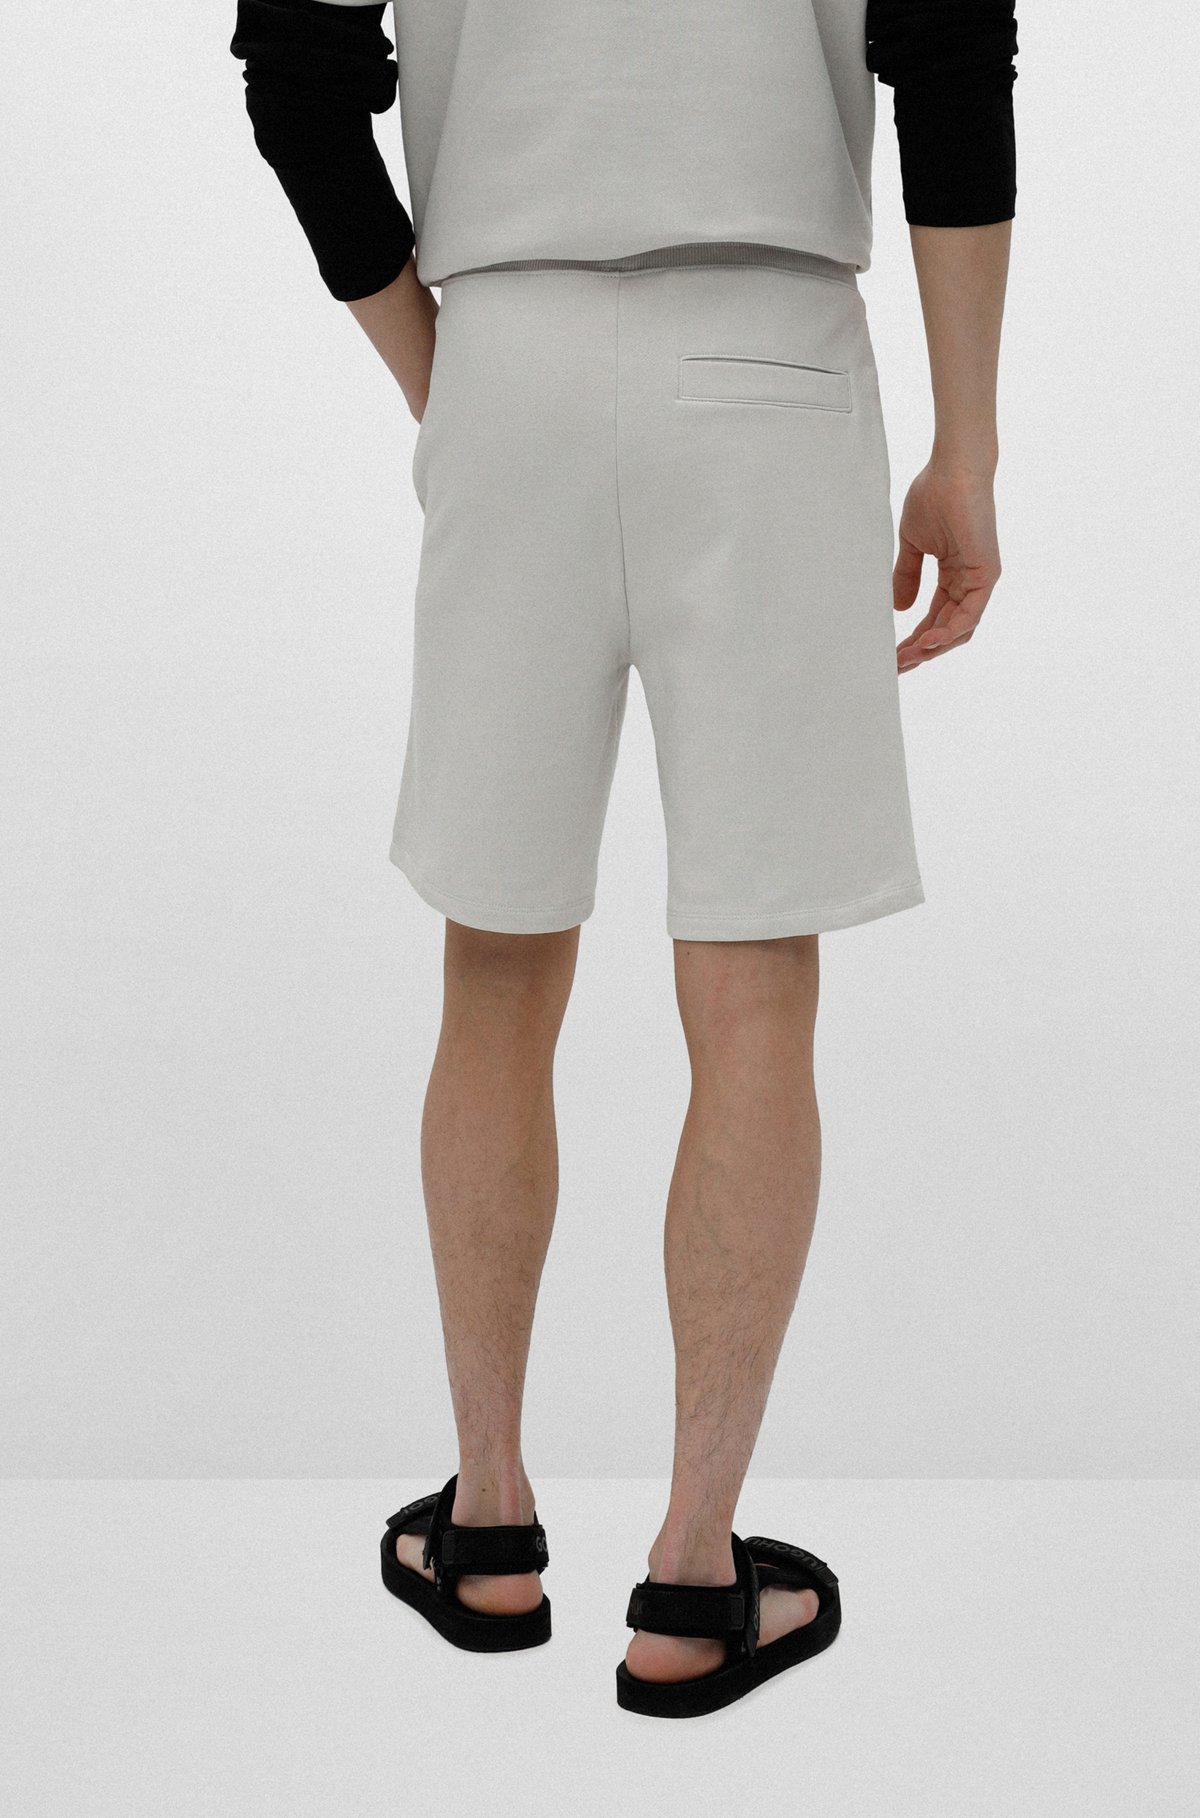 HUGO - Cotton-terry regular-fit shorts with logo label